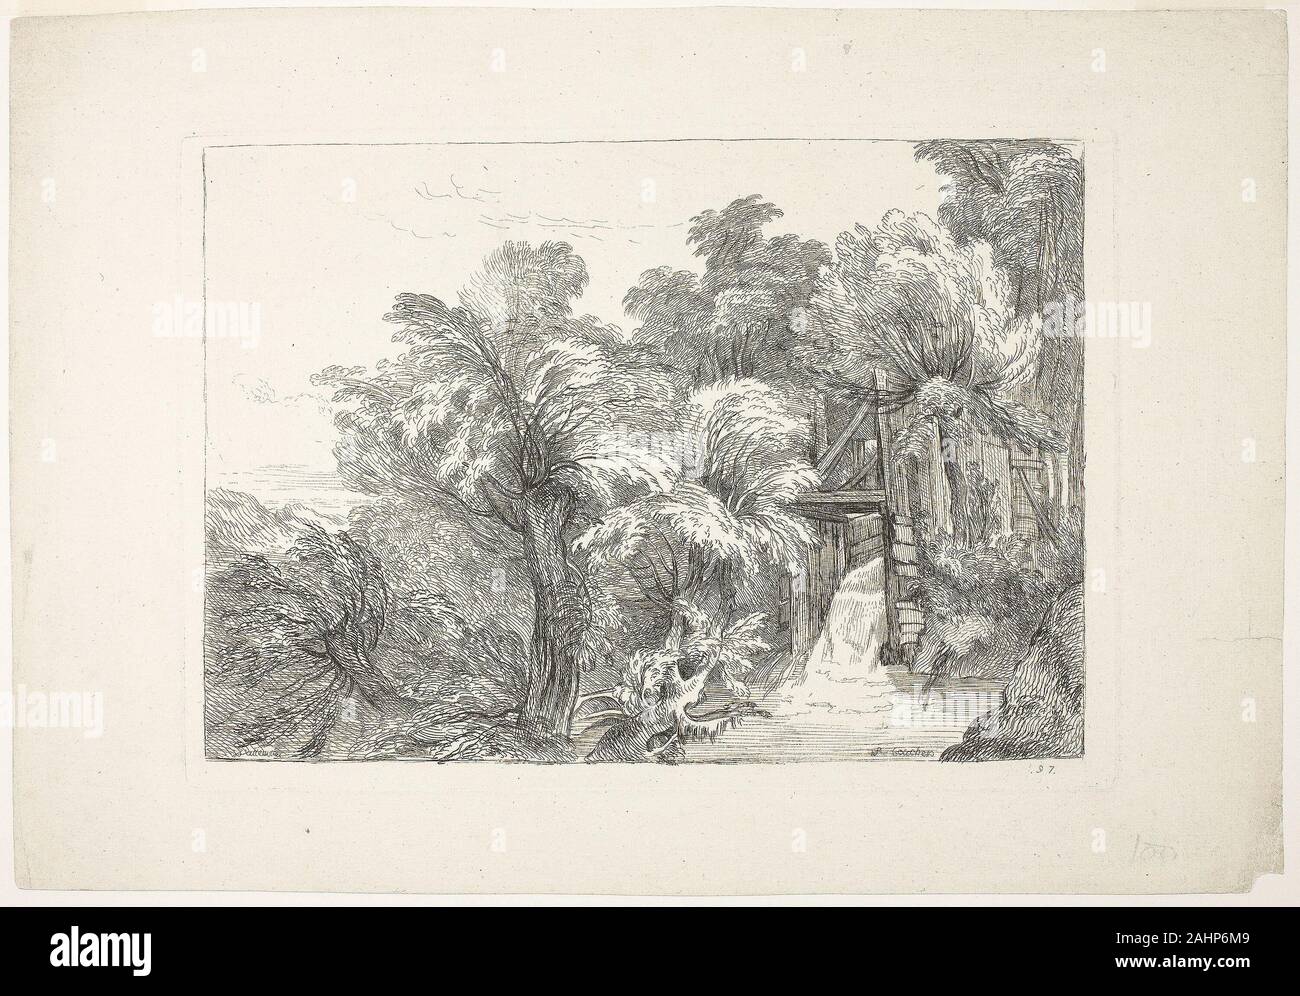 François Boucher. A Mill Lock in the Middle of Willows, plate 97 from Figures de différents caractères, de Paysages, et d’Etudes dessinées d'après nature (Figures of Different Characters, Landscapes, and Studies Drawn from Nature). 1726. France. Etching on ivory laid paper Stock Photo